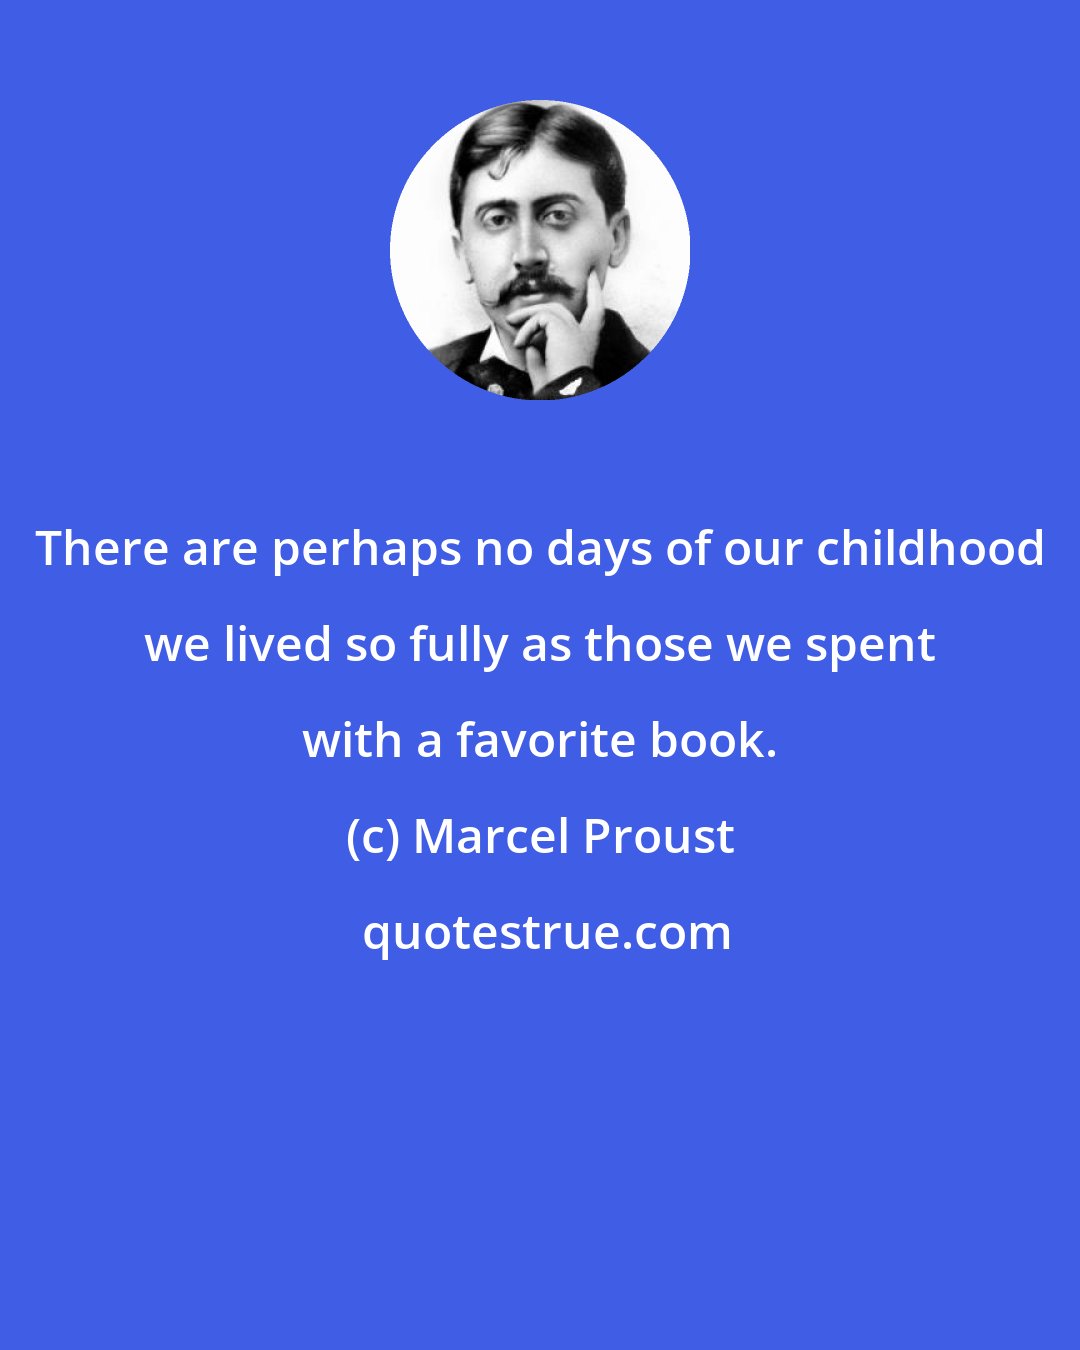 Marcel Proust: There are perhaps no days of our childhood we lived so fully as those we spent with a favorite book.